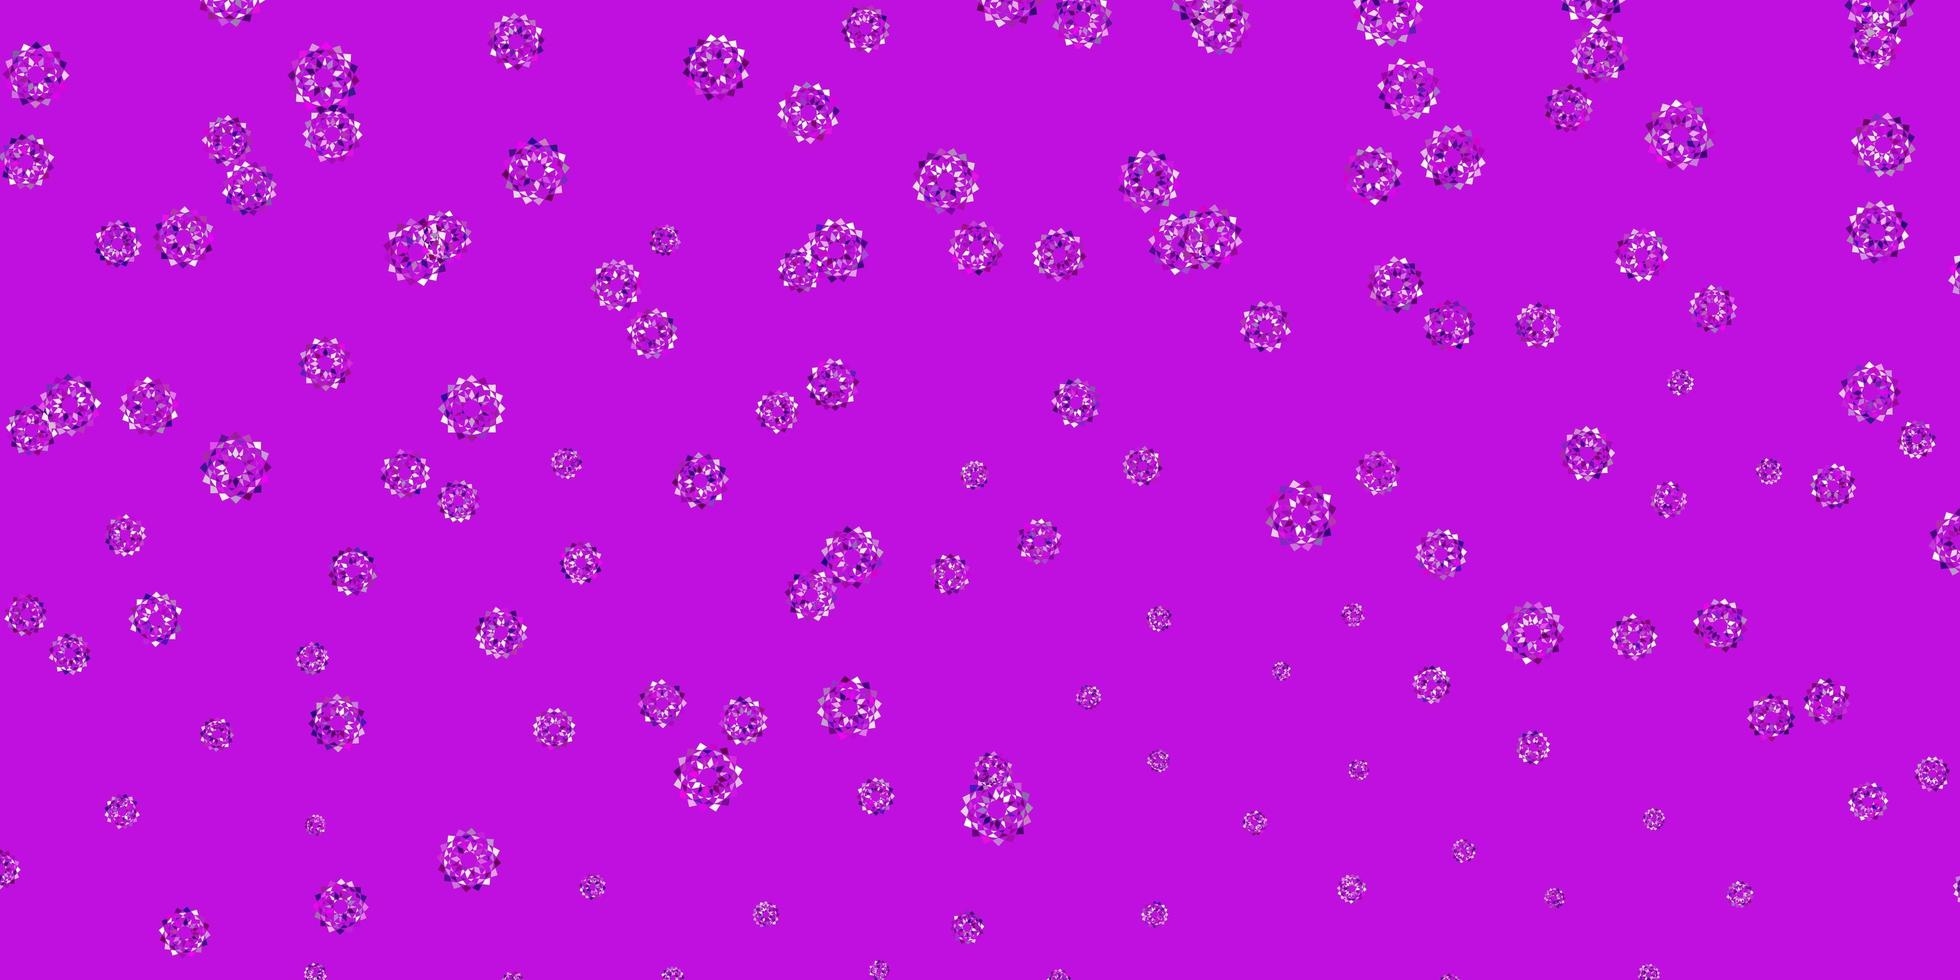 Light pink vector doodle pattern with flowers.